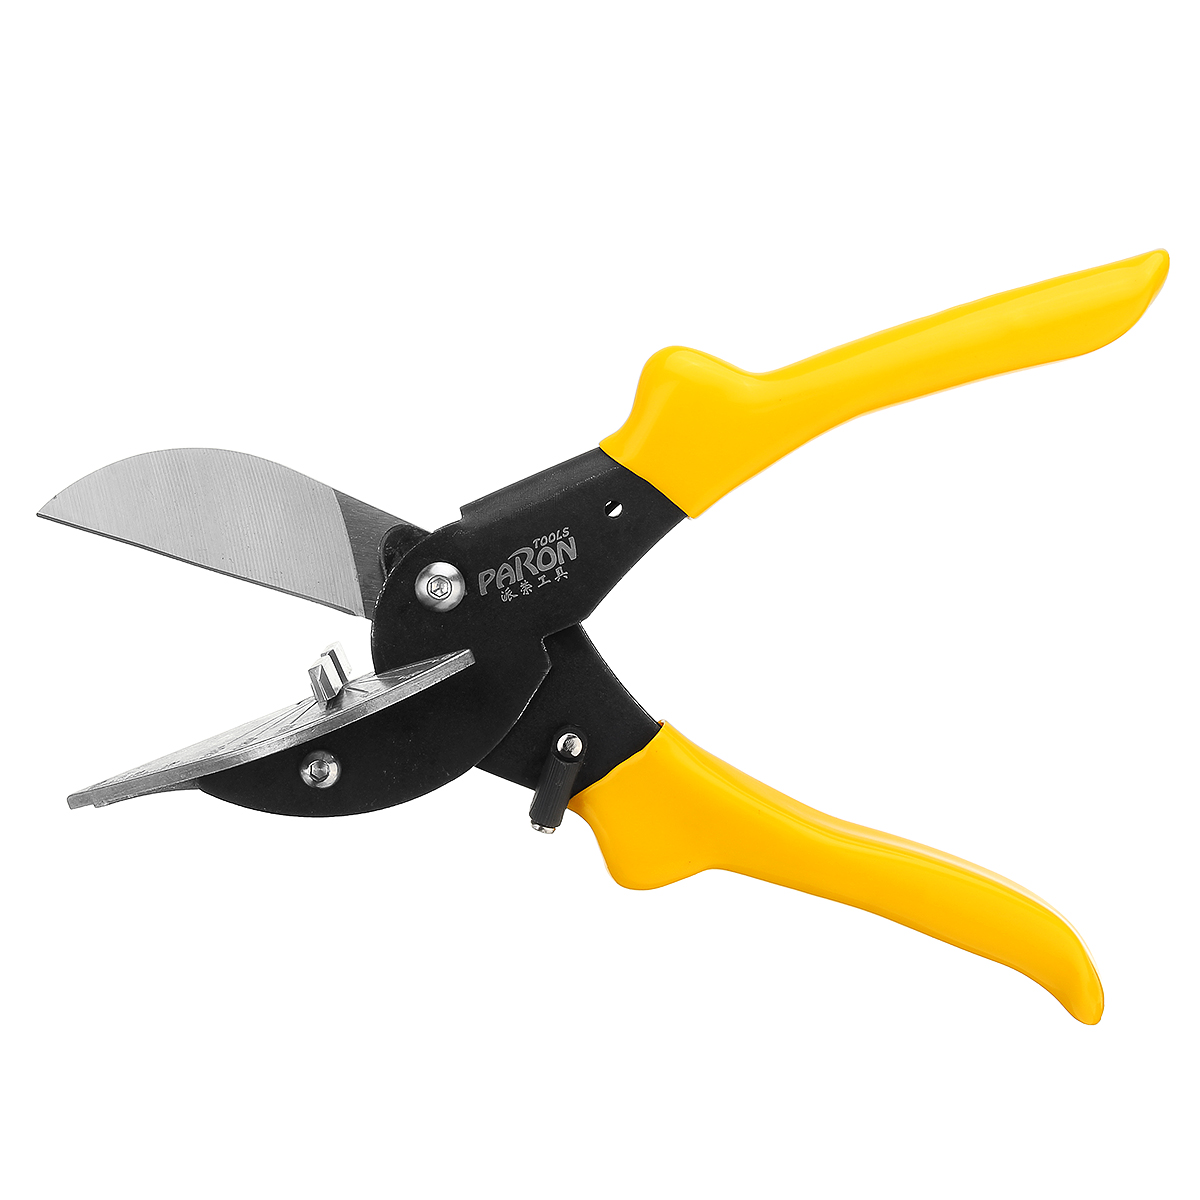 Find ParonÂ® JX-C8025 45Â°-135Â° Adjustable Universal Angle Cutter Mitre Shear with Blades Screwdriver Tools for Sale on Gipsybee.com with cryptocurrencies